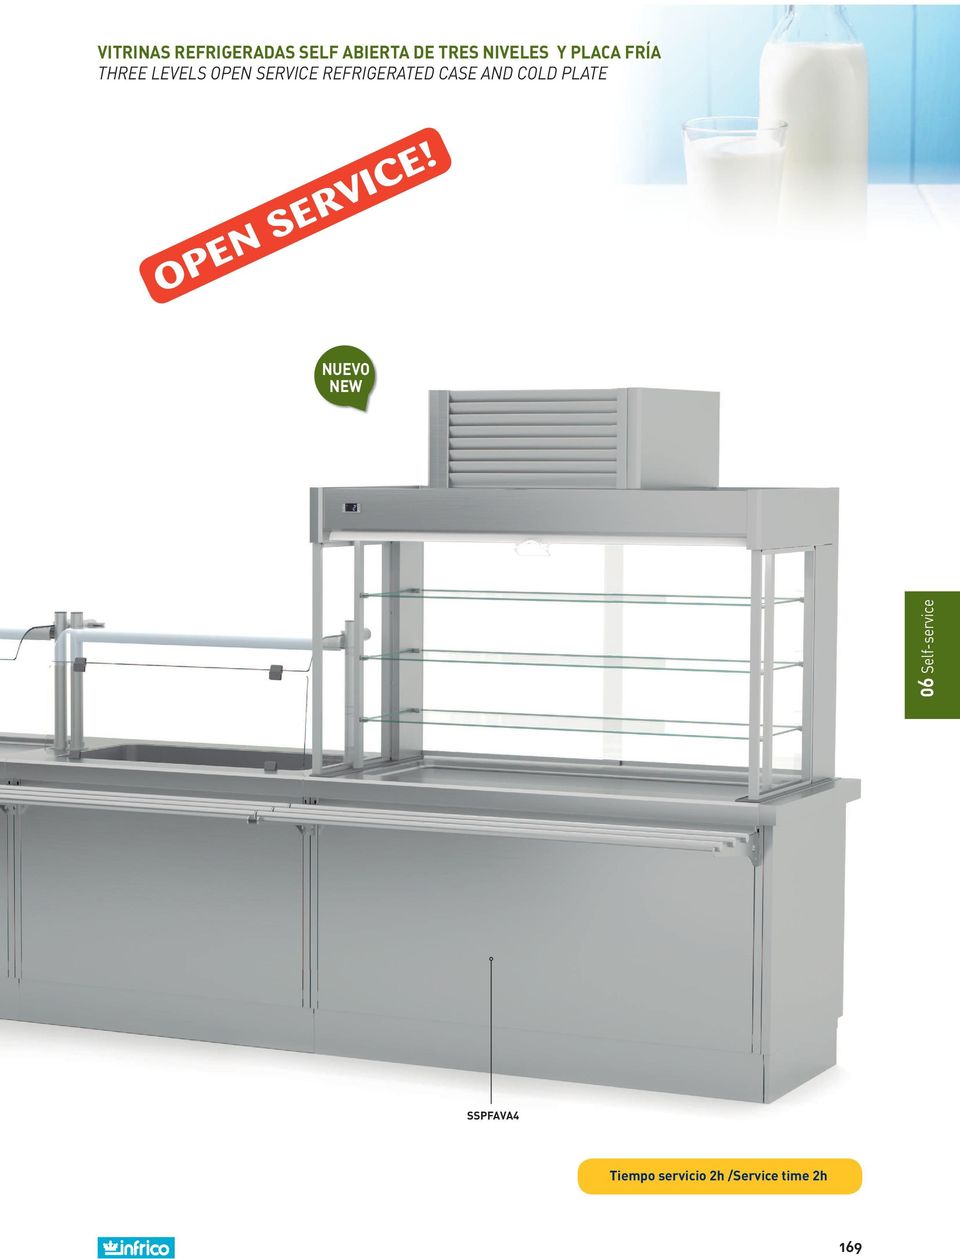 REFRIGERATED CASE AND COLD PLATE OPEN SERVICE!